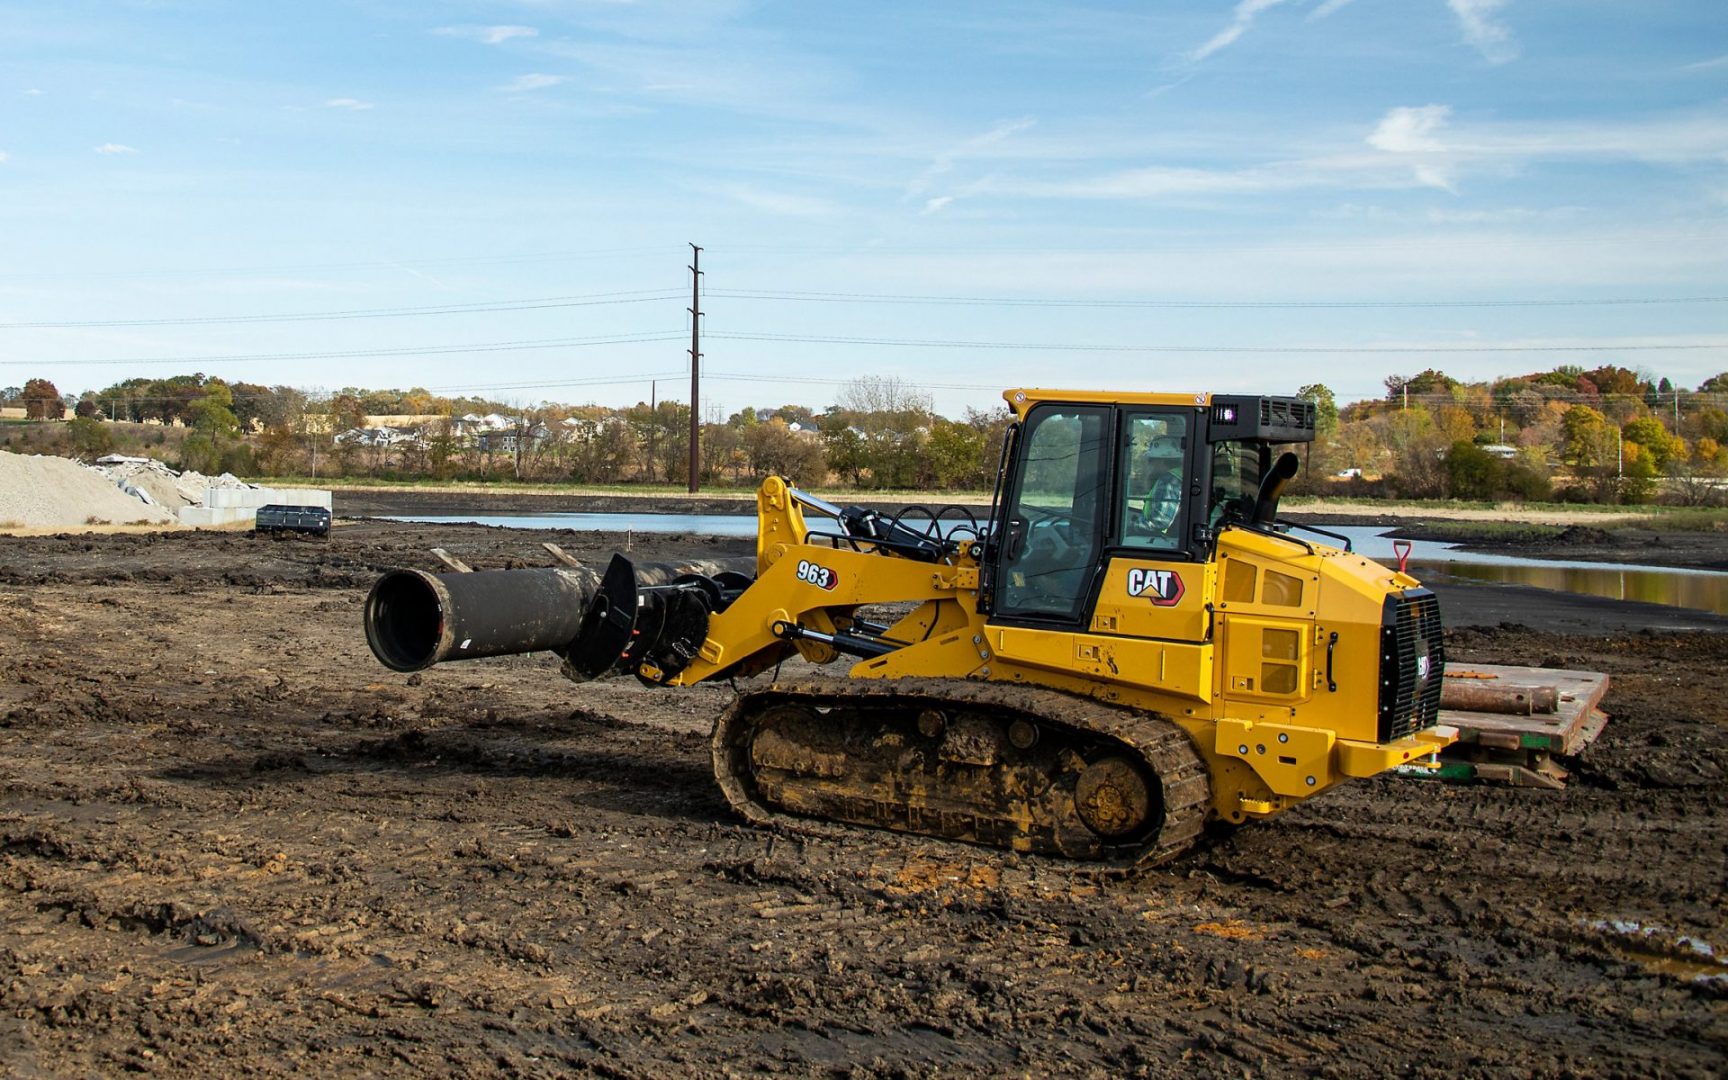 Cat’s 963 Track Loader boosts torque, while reducing fuel consumption